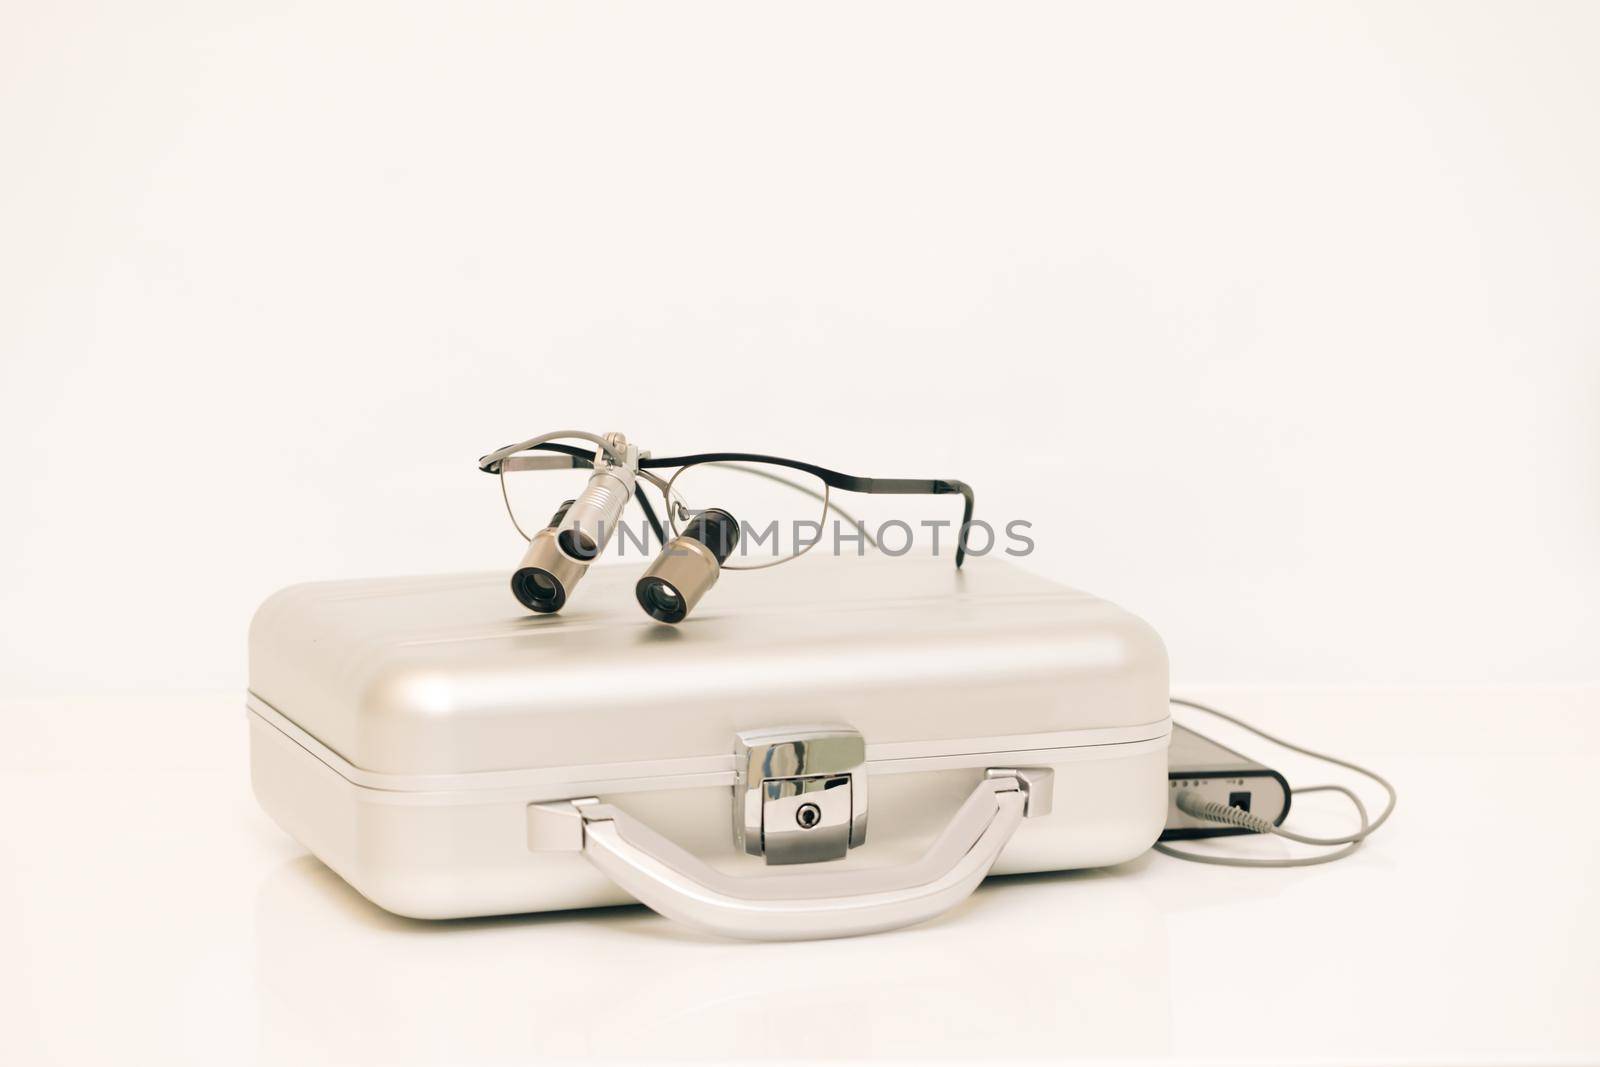 Dental and teethcare care tools. Orthodontist binocular. Spectacles magnifying binocular for dental surgery. Binoculars dentistry on the table.